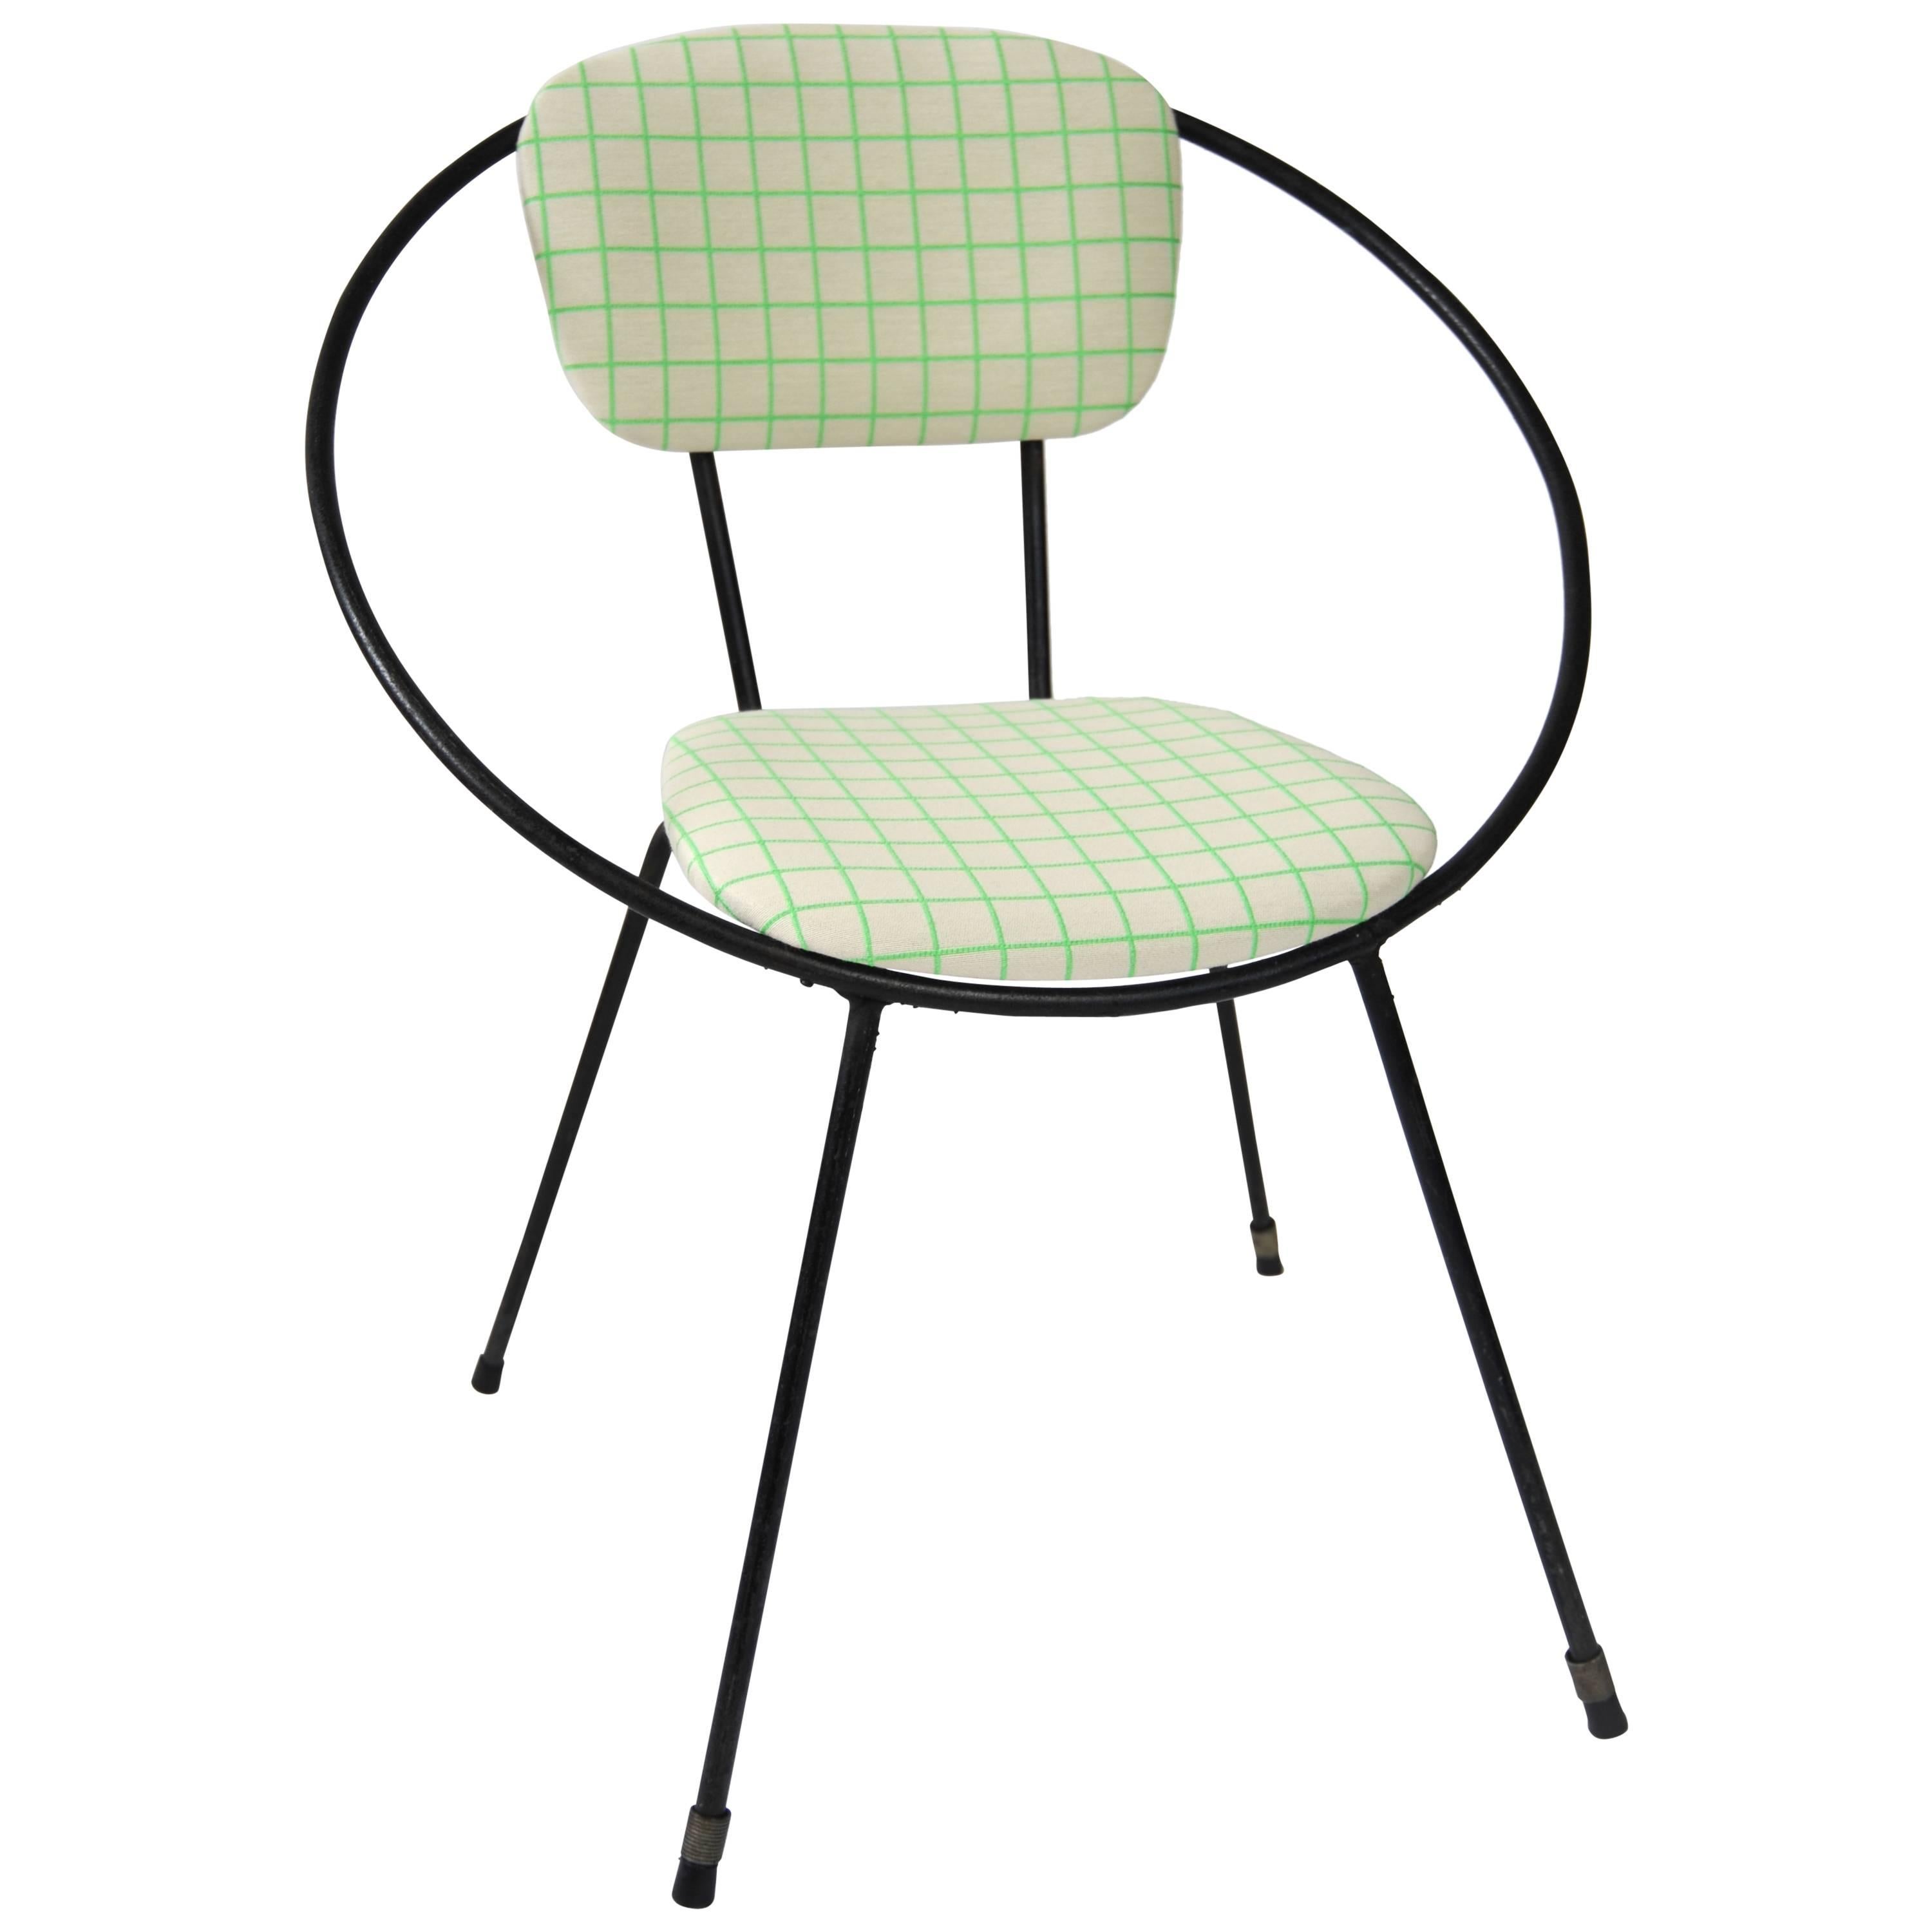 Pair of 1950s Iron Circle Chairs with Contemporary Maharam Fabric

USA, 1950s
Iron, upholstered seat and back
Recovered in “Bright Grid, Spring by Scholten & Baijings” by Maharam
H 20.75 in, W 11 in, D 12.5 in (seat: H 10 in)